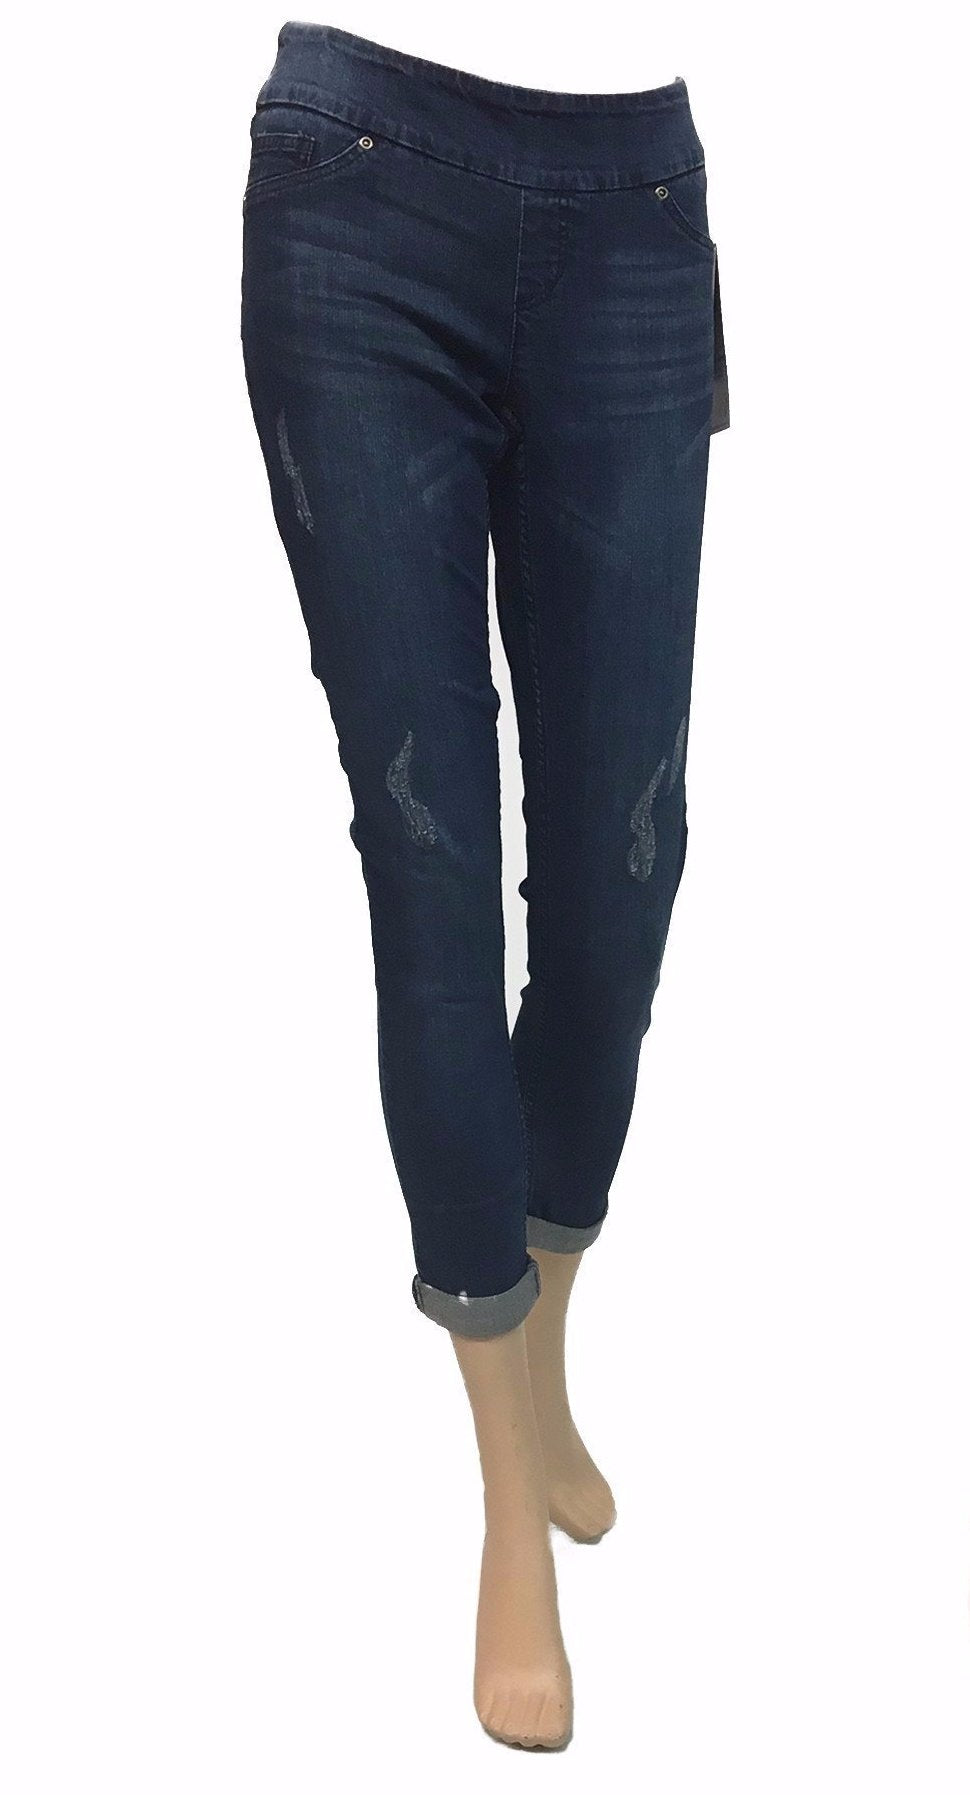 Women's Up!, Blue Jean Pull On Cotton Blend Pants